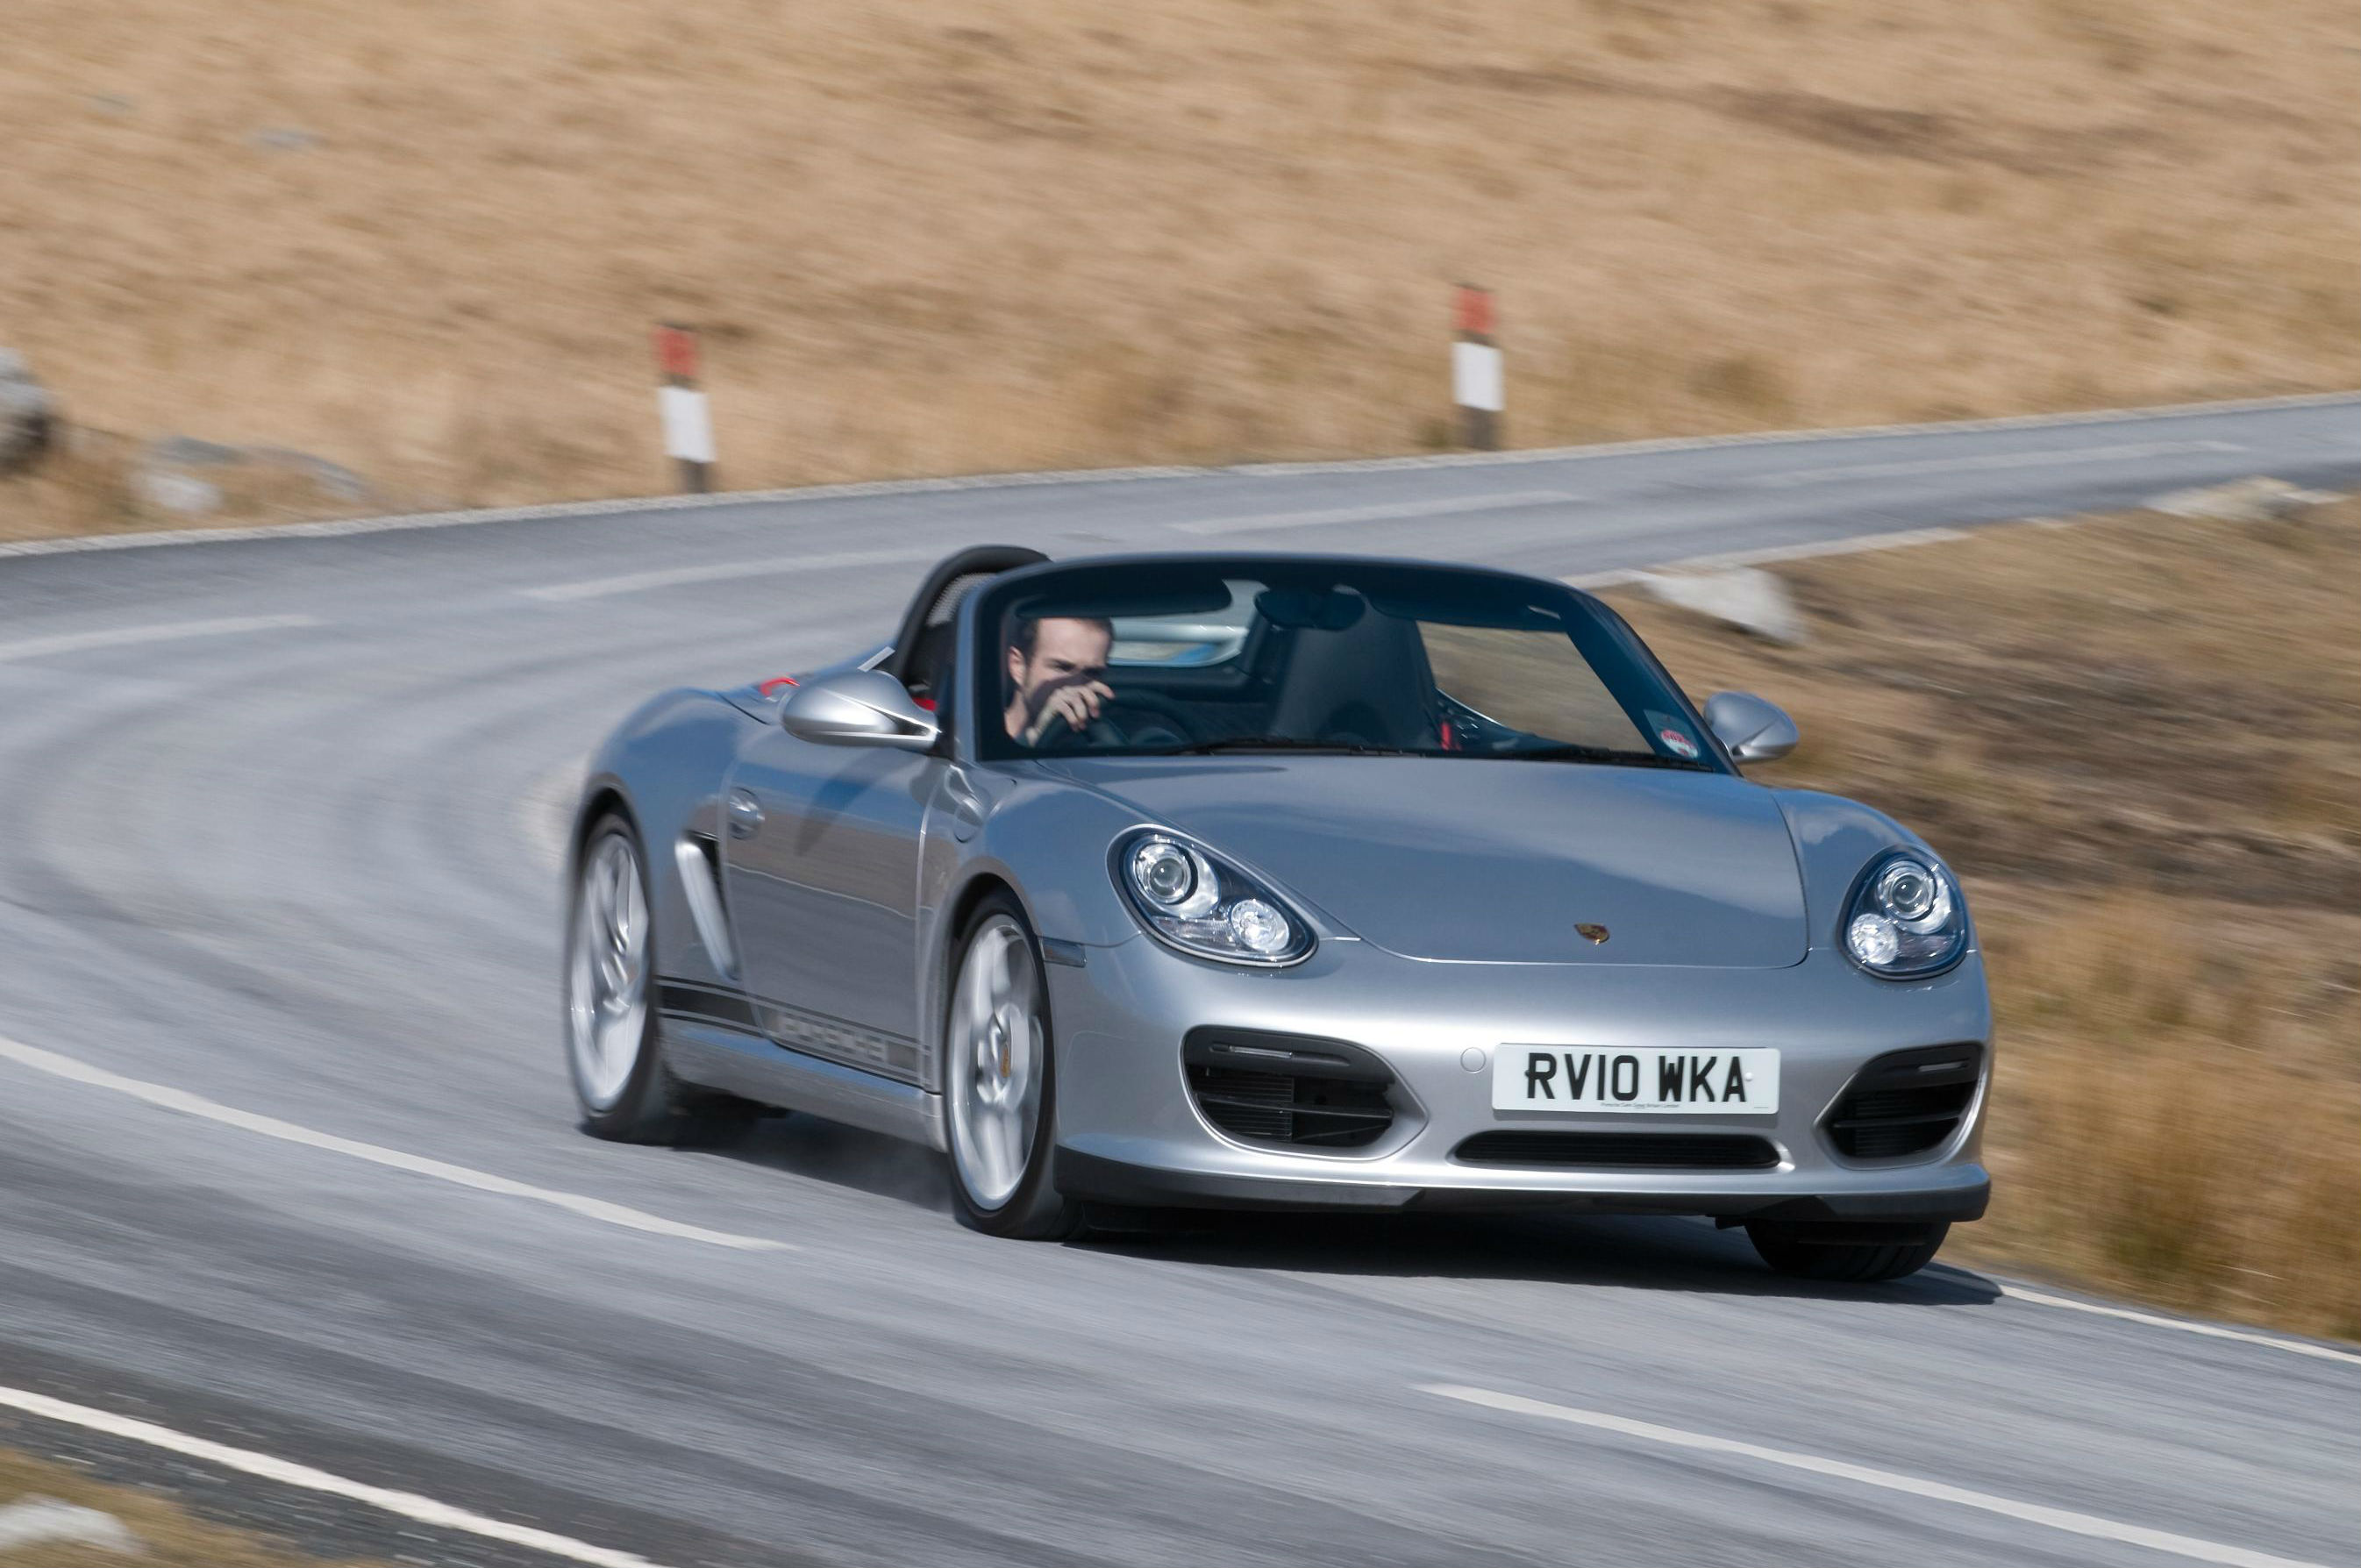 Porsche Boxster buying guide, including the 986, 987 and 981 models and Spyder